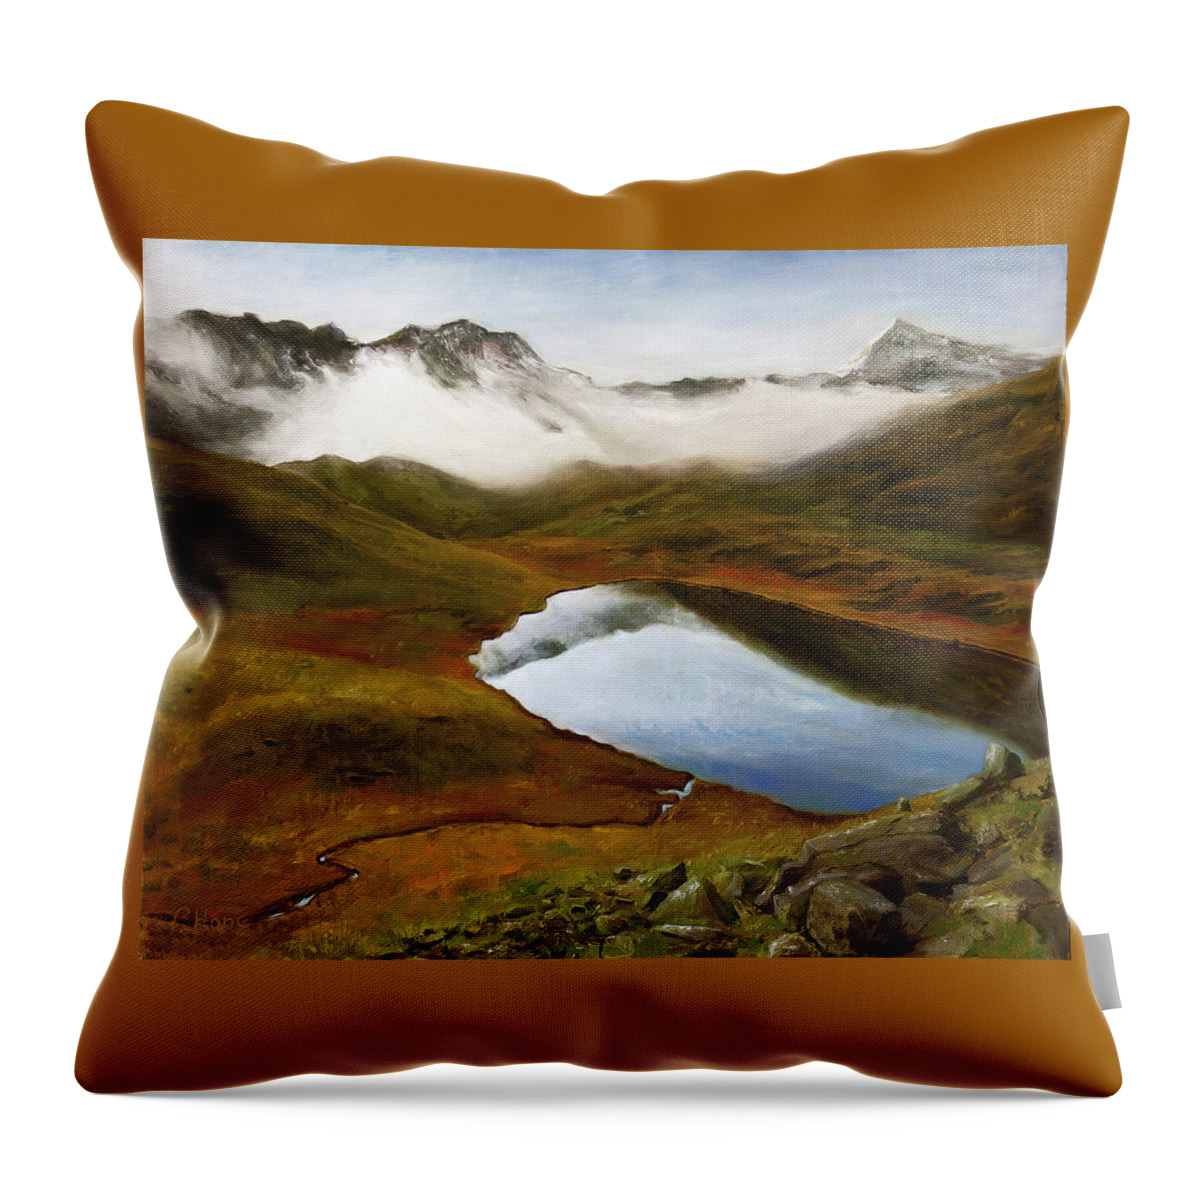 Glacial Throw Pillow featuring the painting Glacial Lake by Hone Williams